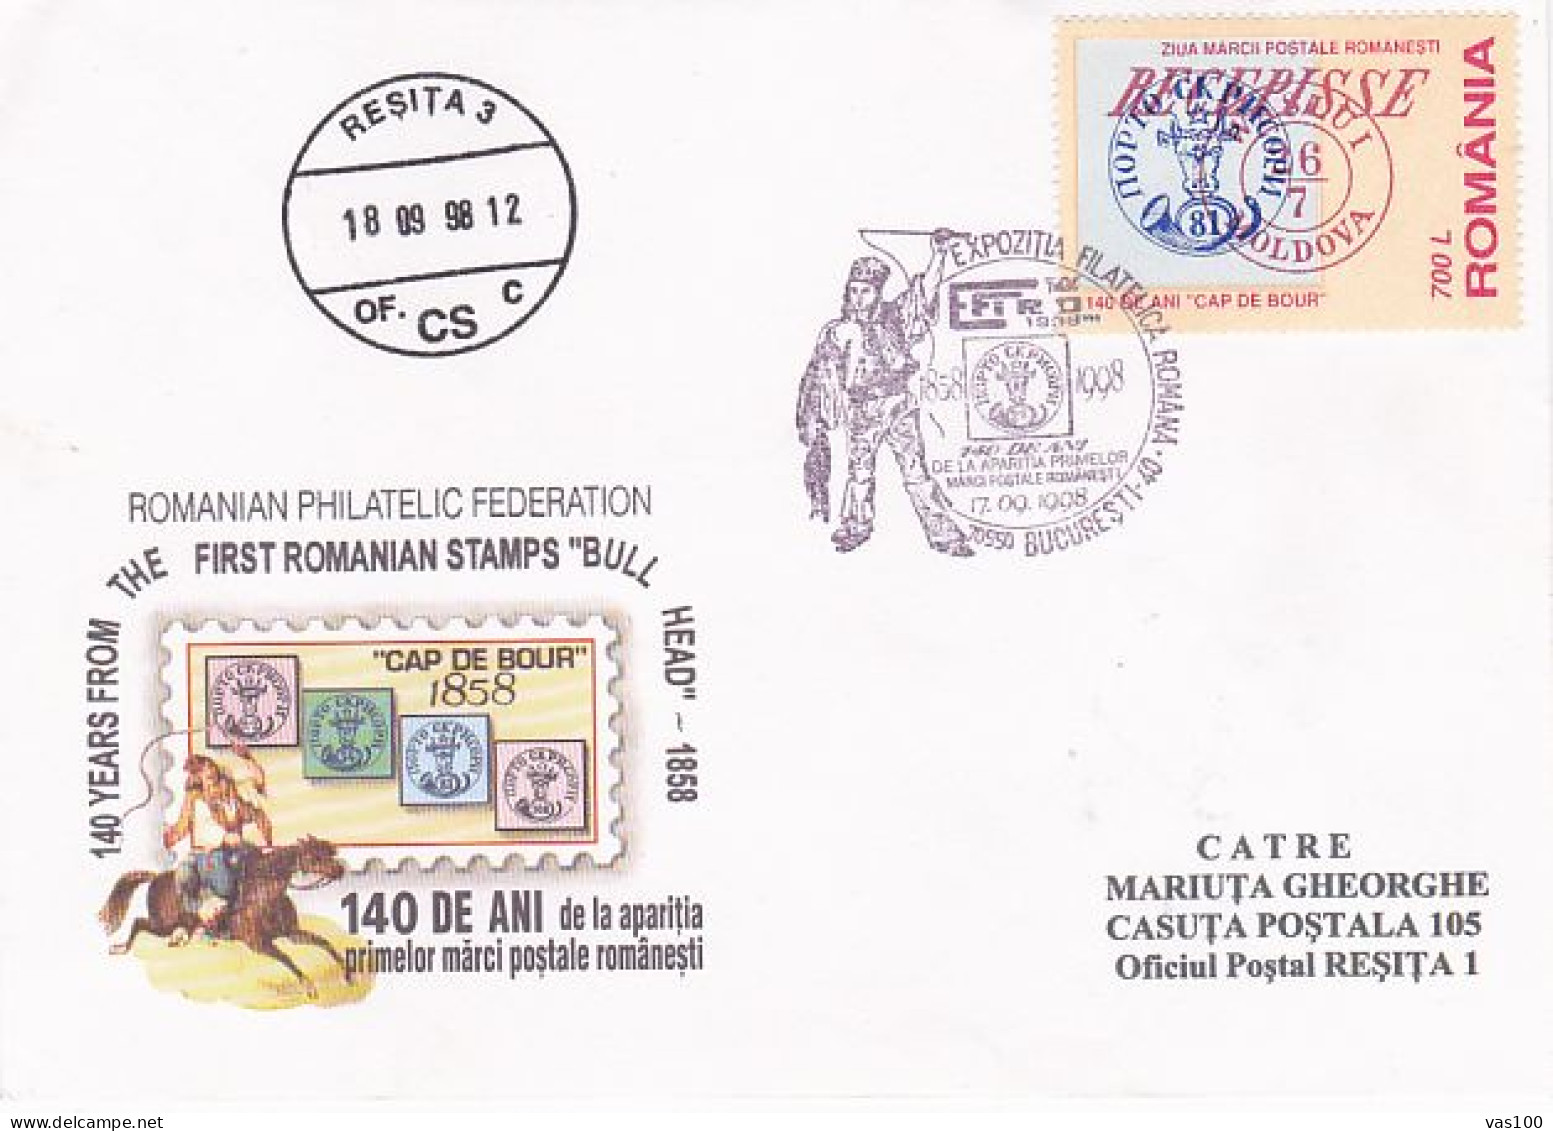 FIRST ROMANIAN STAMP ANNIVERSARY, BULL'S HEAD, OVERPRINT STAMP, SPECIAL COVER, 1998, ROMANIA - Covers & Documents